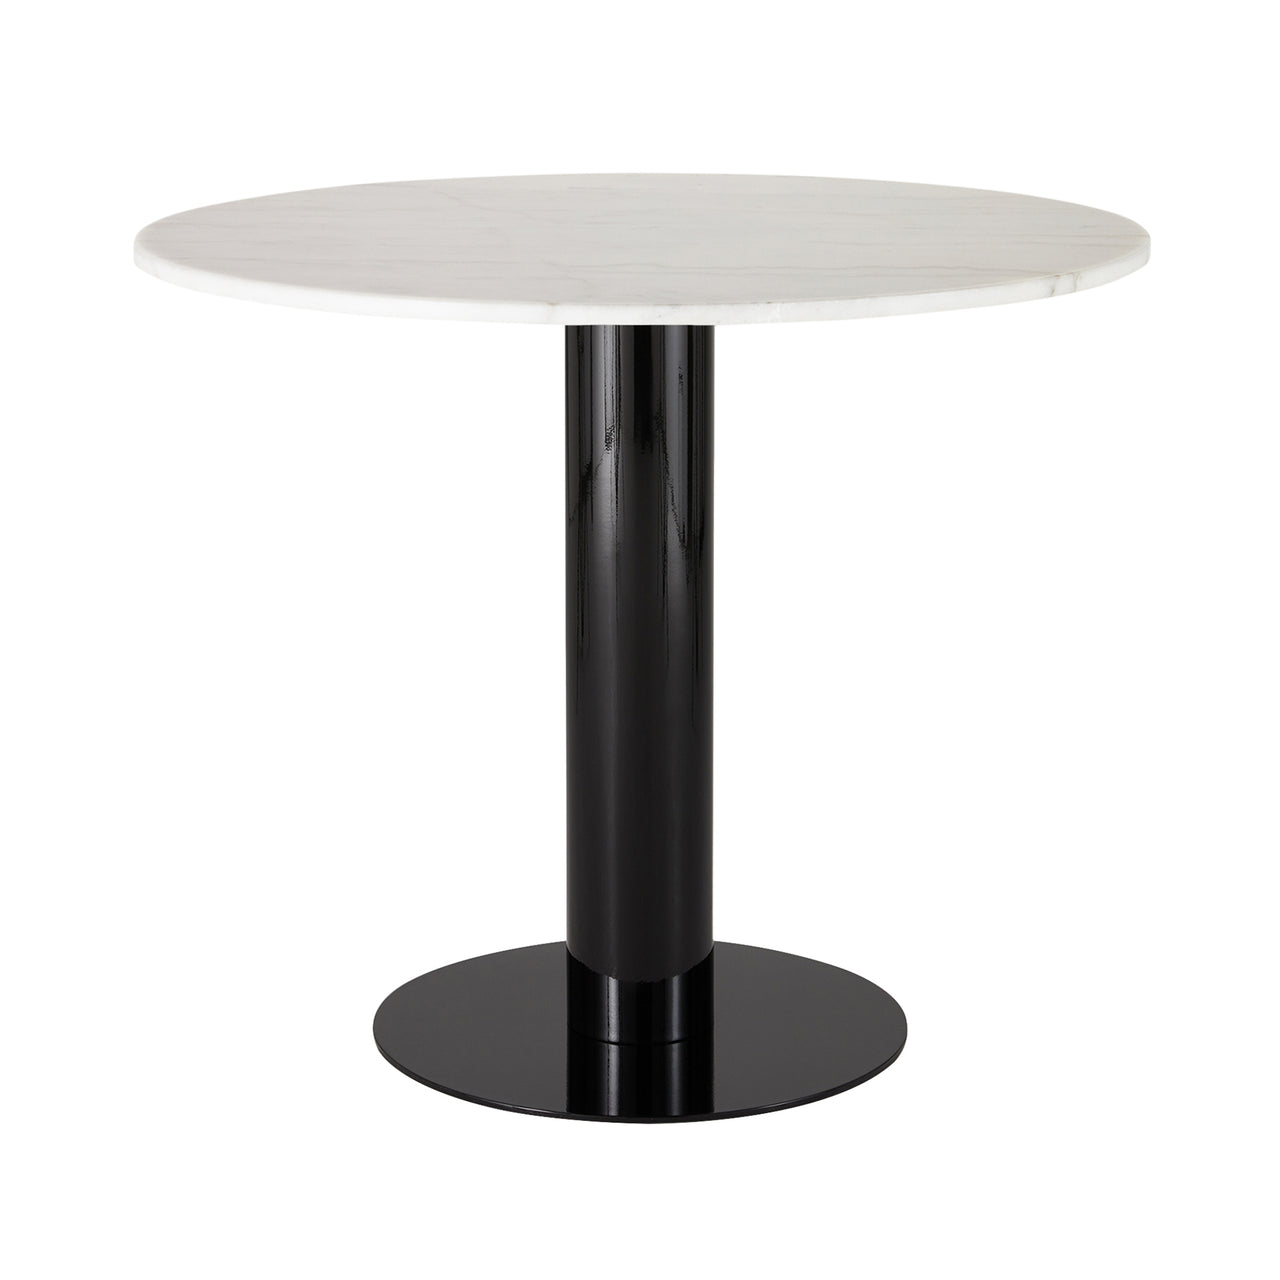 Tube Dining Table: Large - 35.4